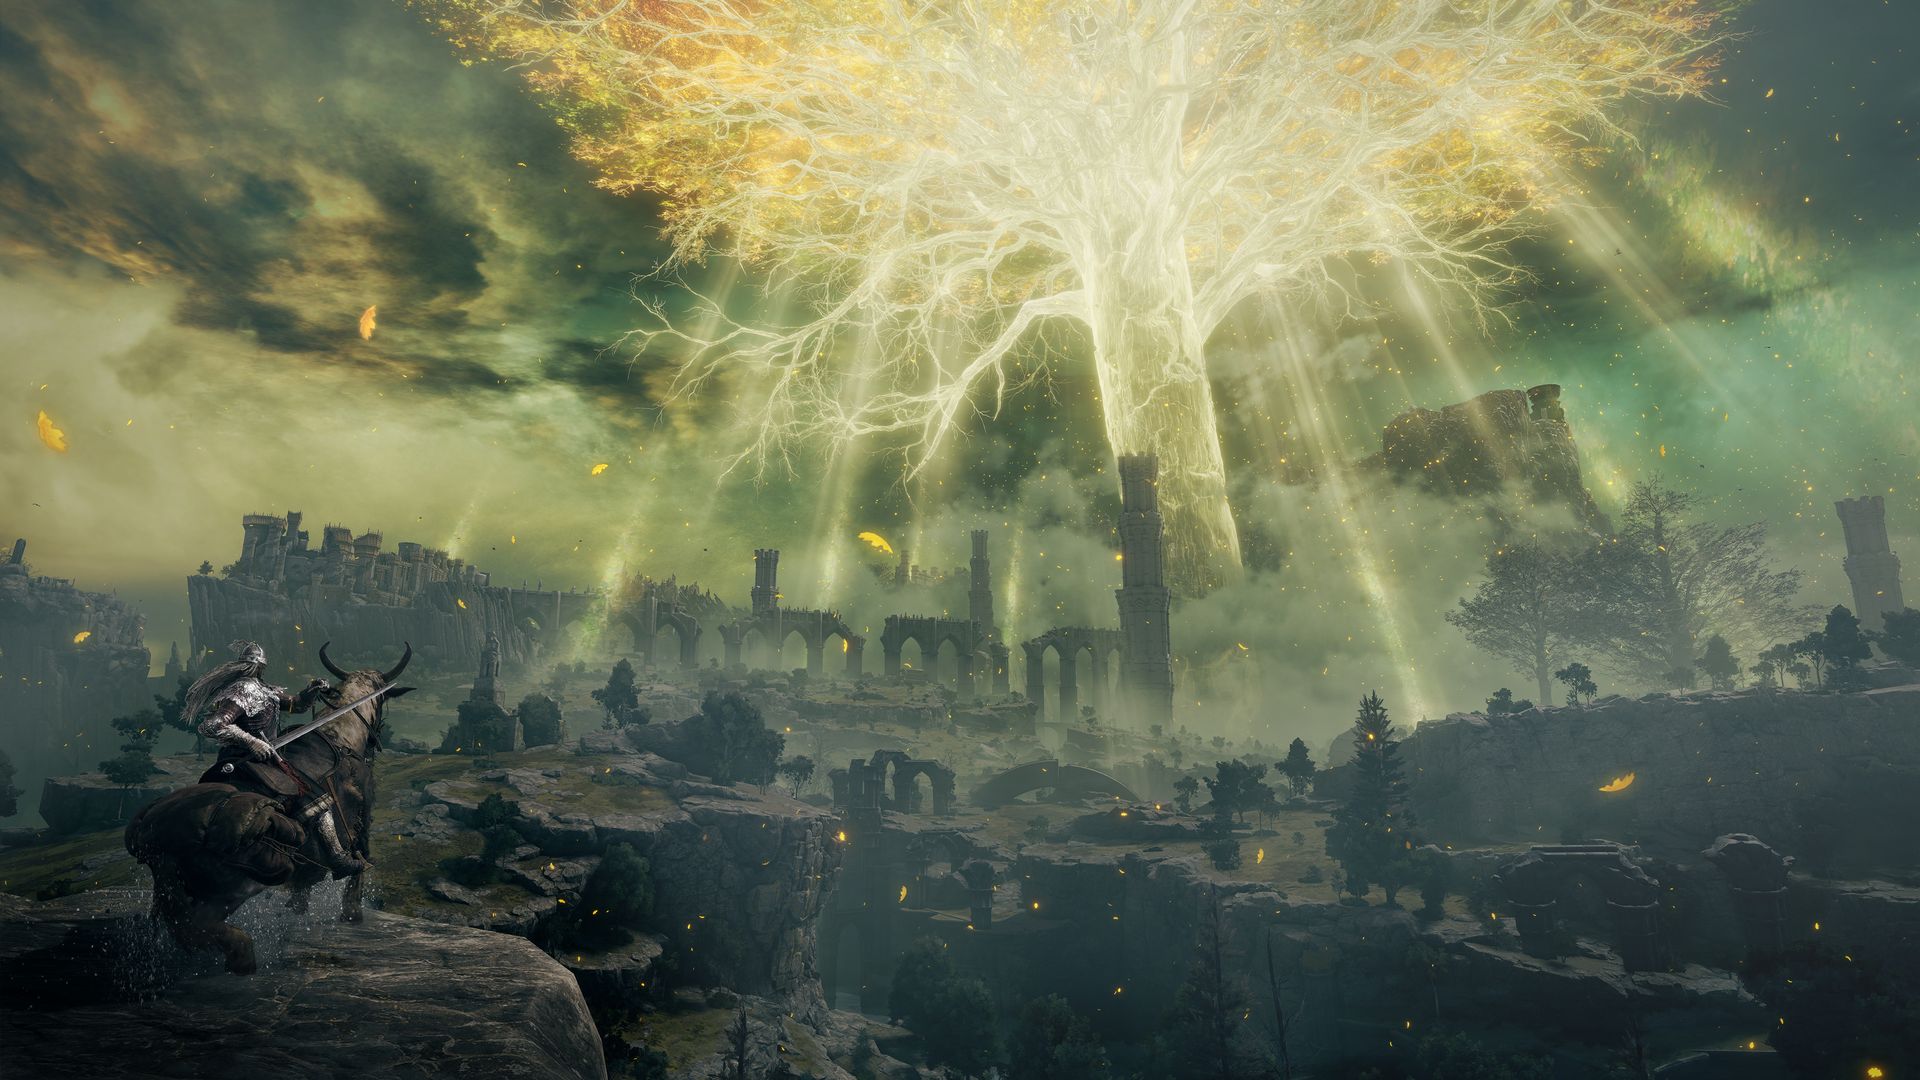 A screenshot from Elden Ring showing a character on horseback on a cliff looking up at a huge, glowing tree.